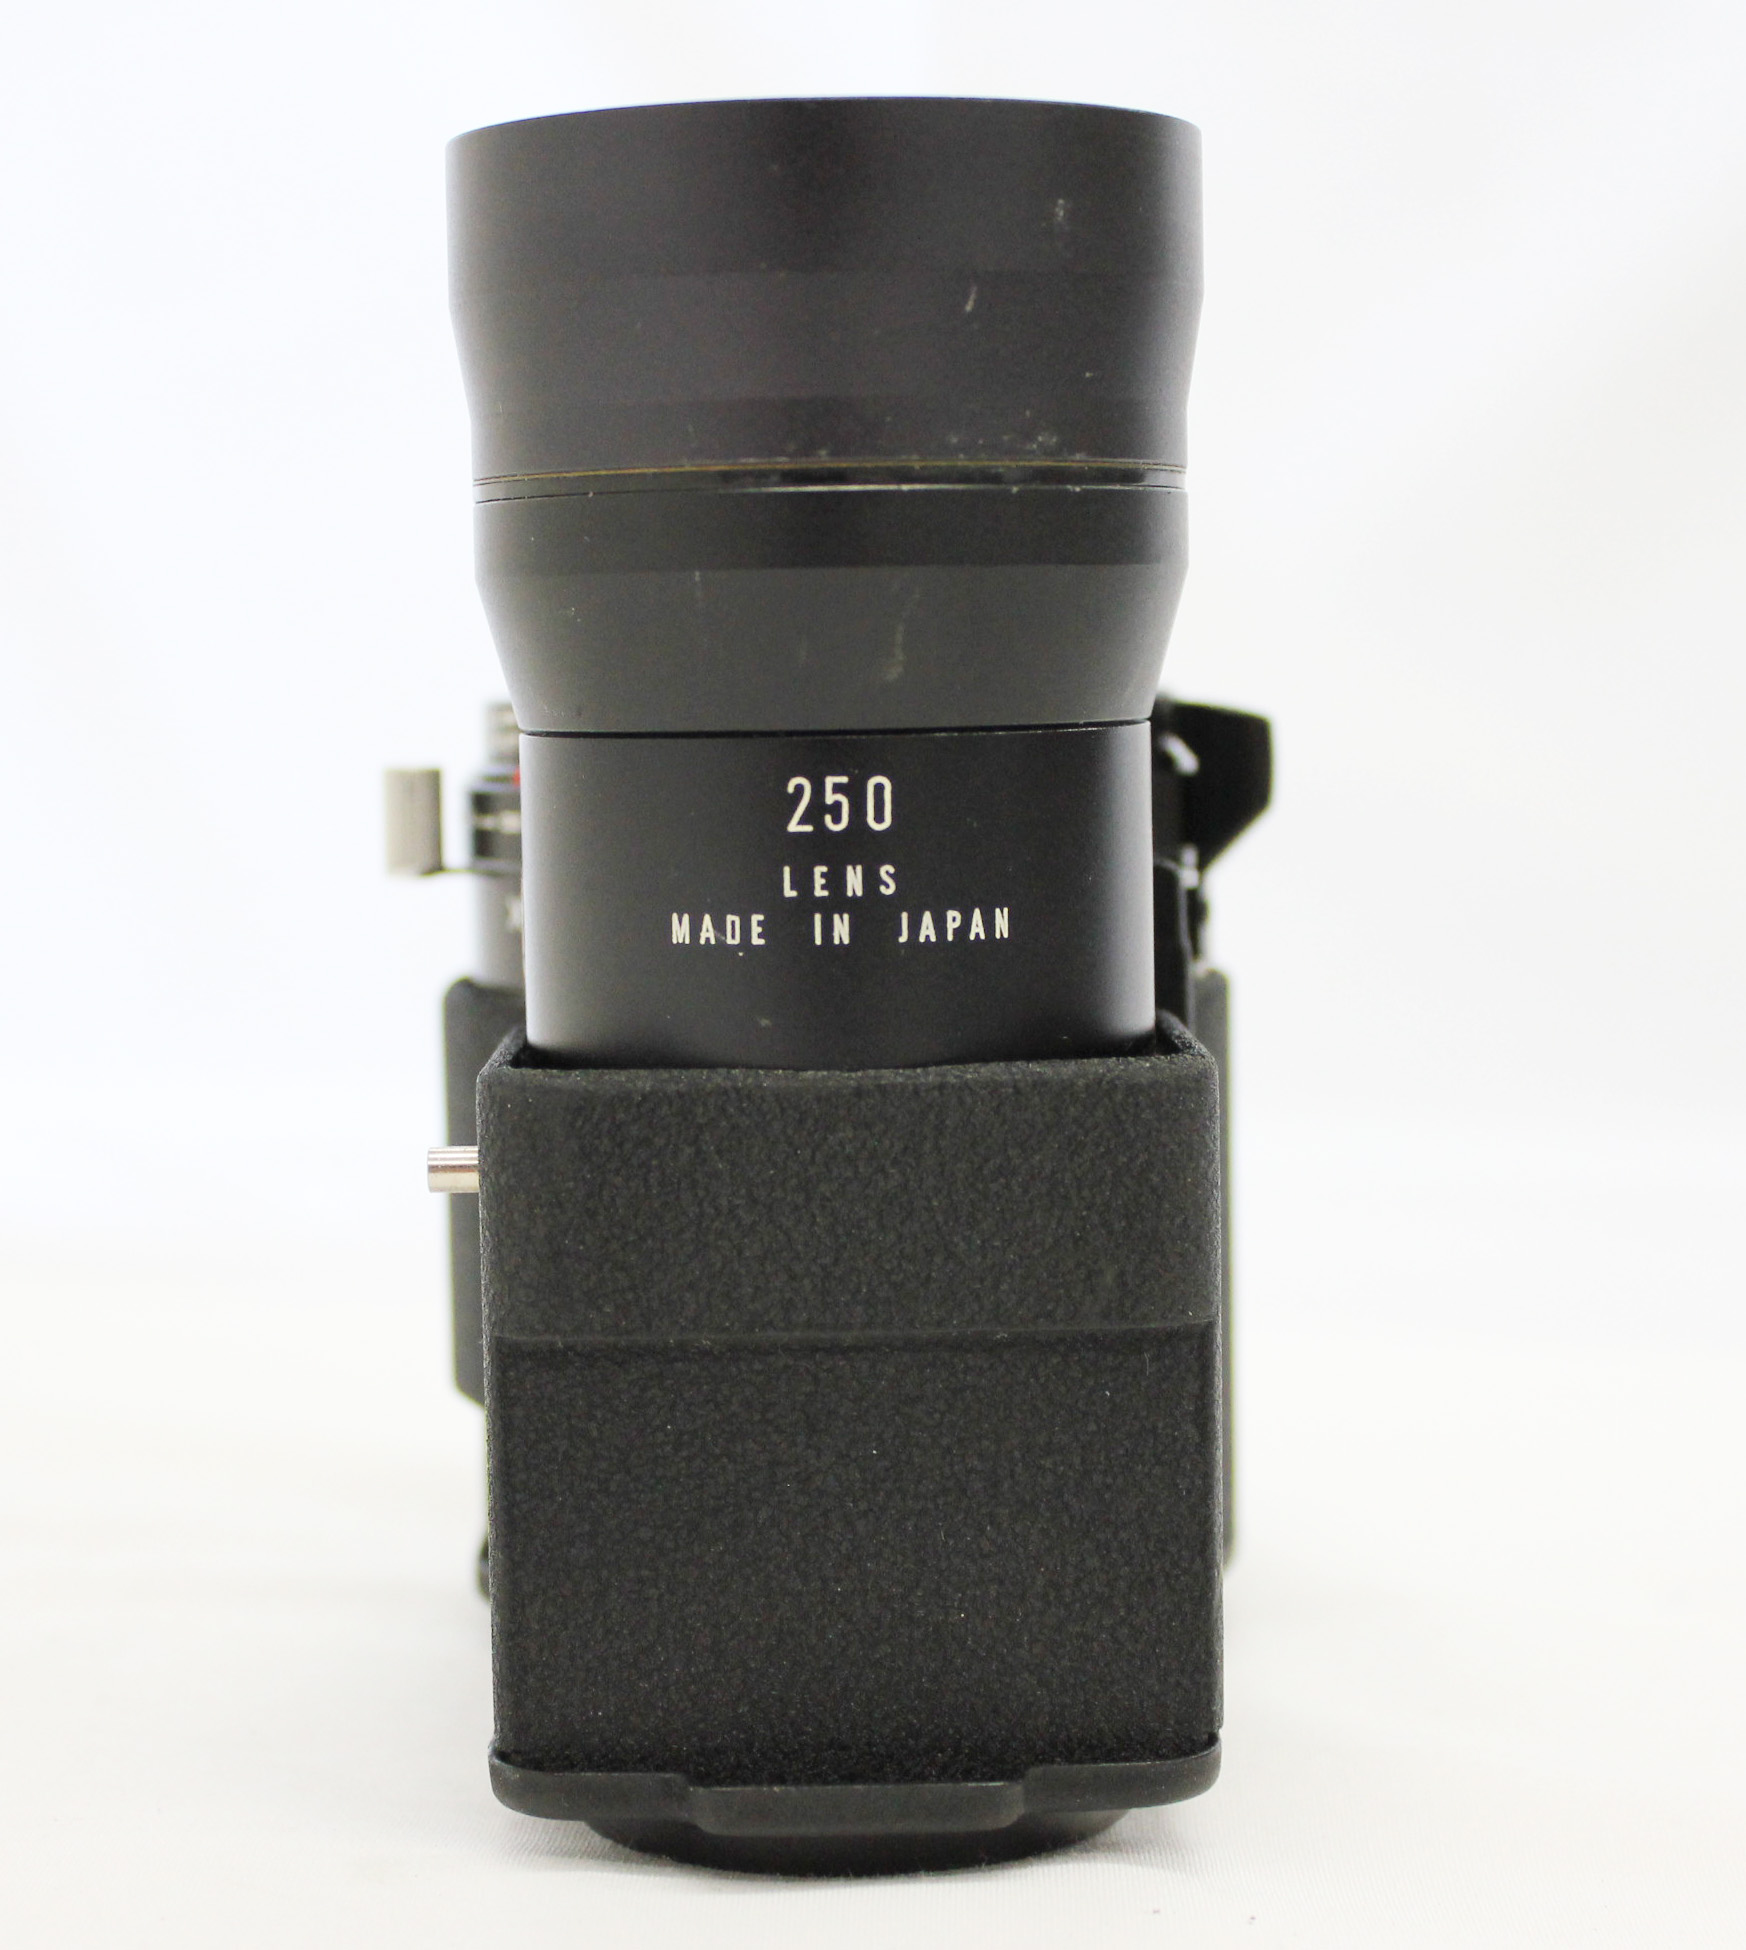  Mamiya Sekor 250mm F/6.3 TLR Lens for C3 C33 C220 C330 from Japan Photo 4